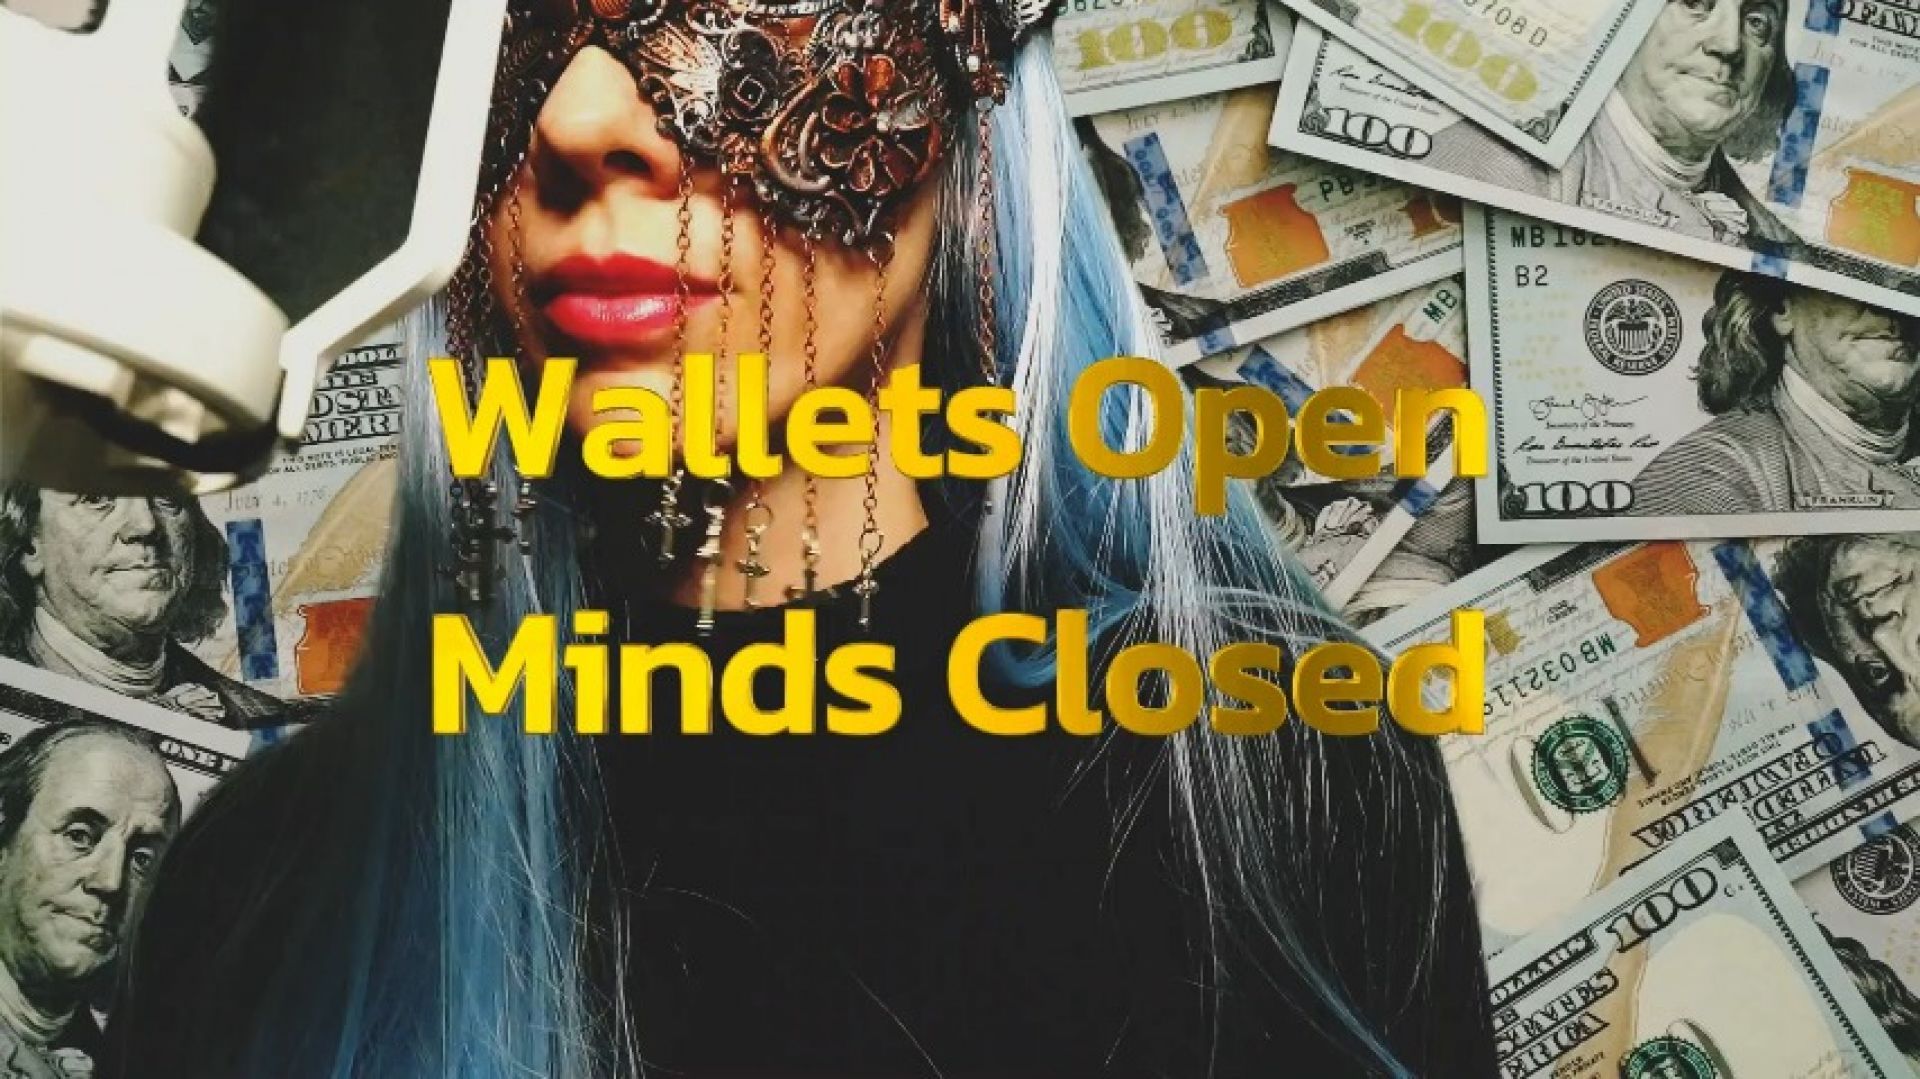 wallets opened minds closed